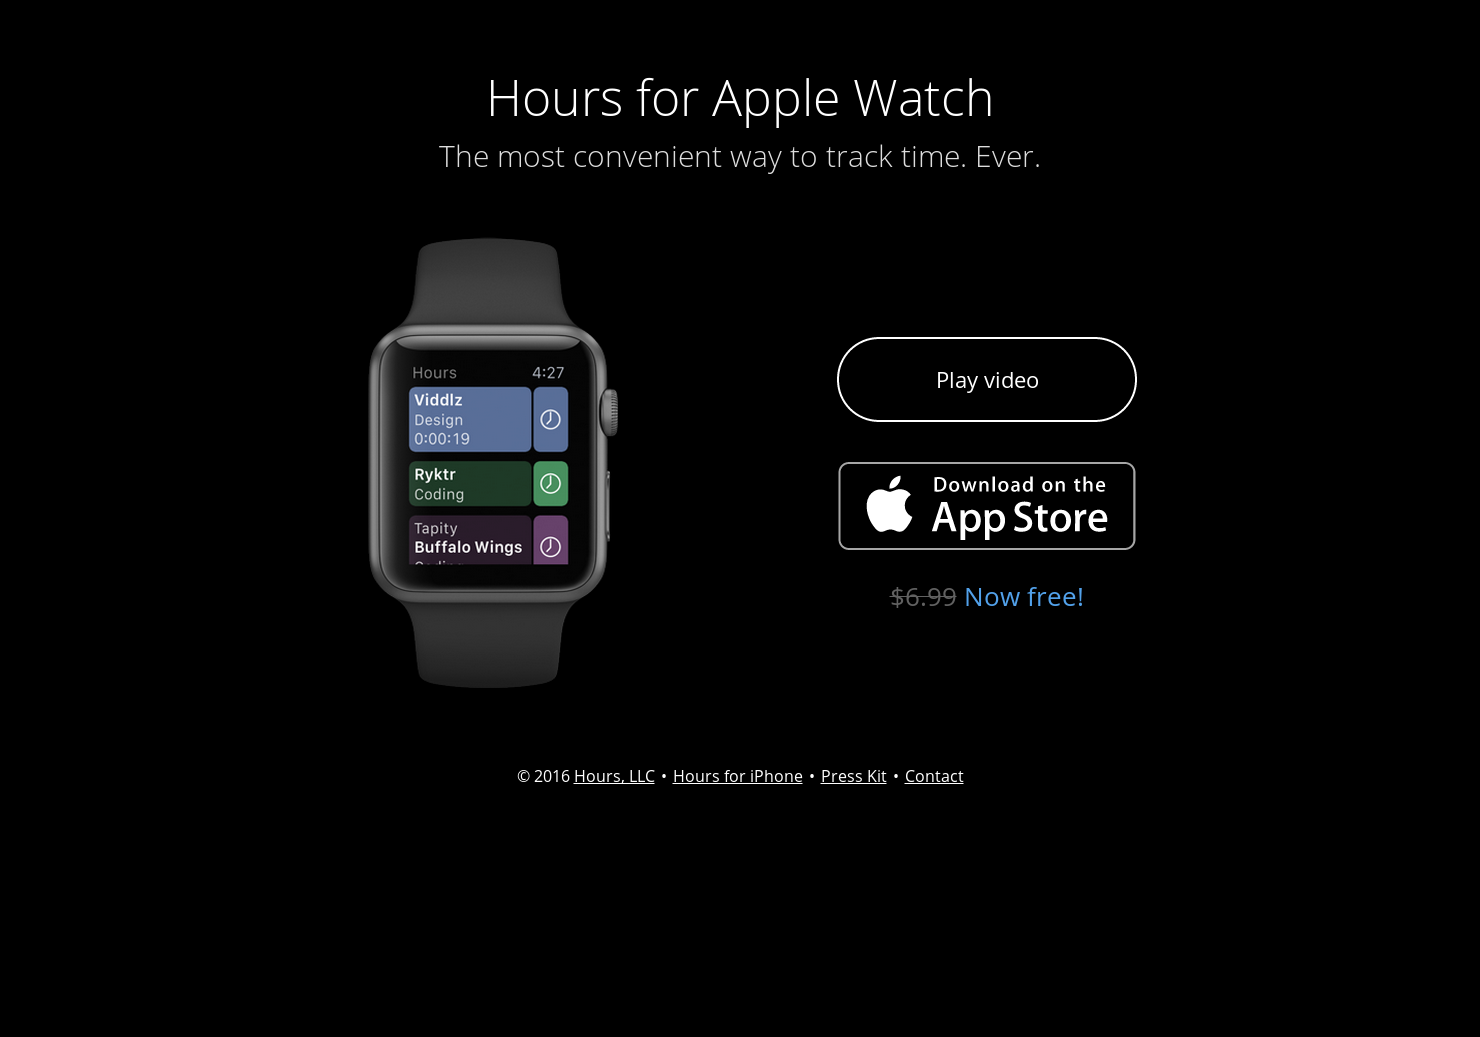 Hours for Apple Watch